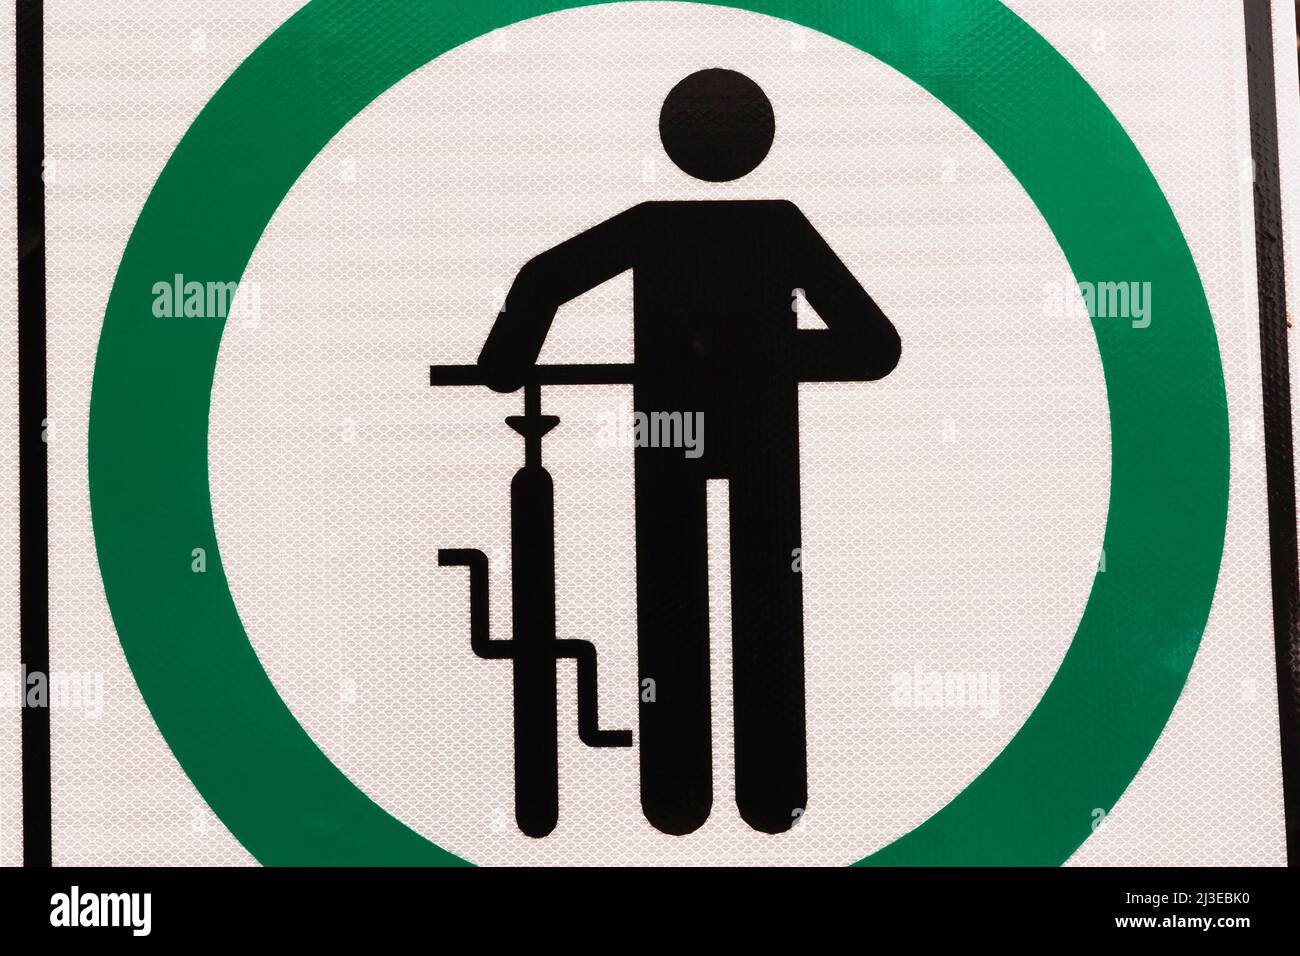 Black, green and white walk next to bicycle pictogram sign. Stock Photo